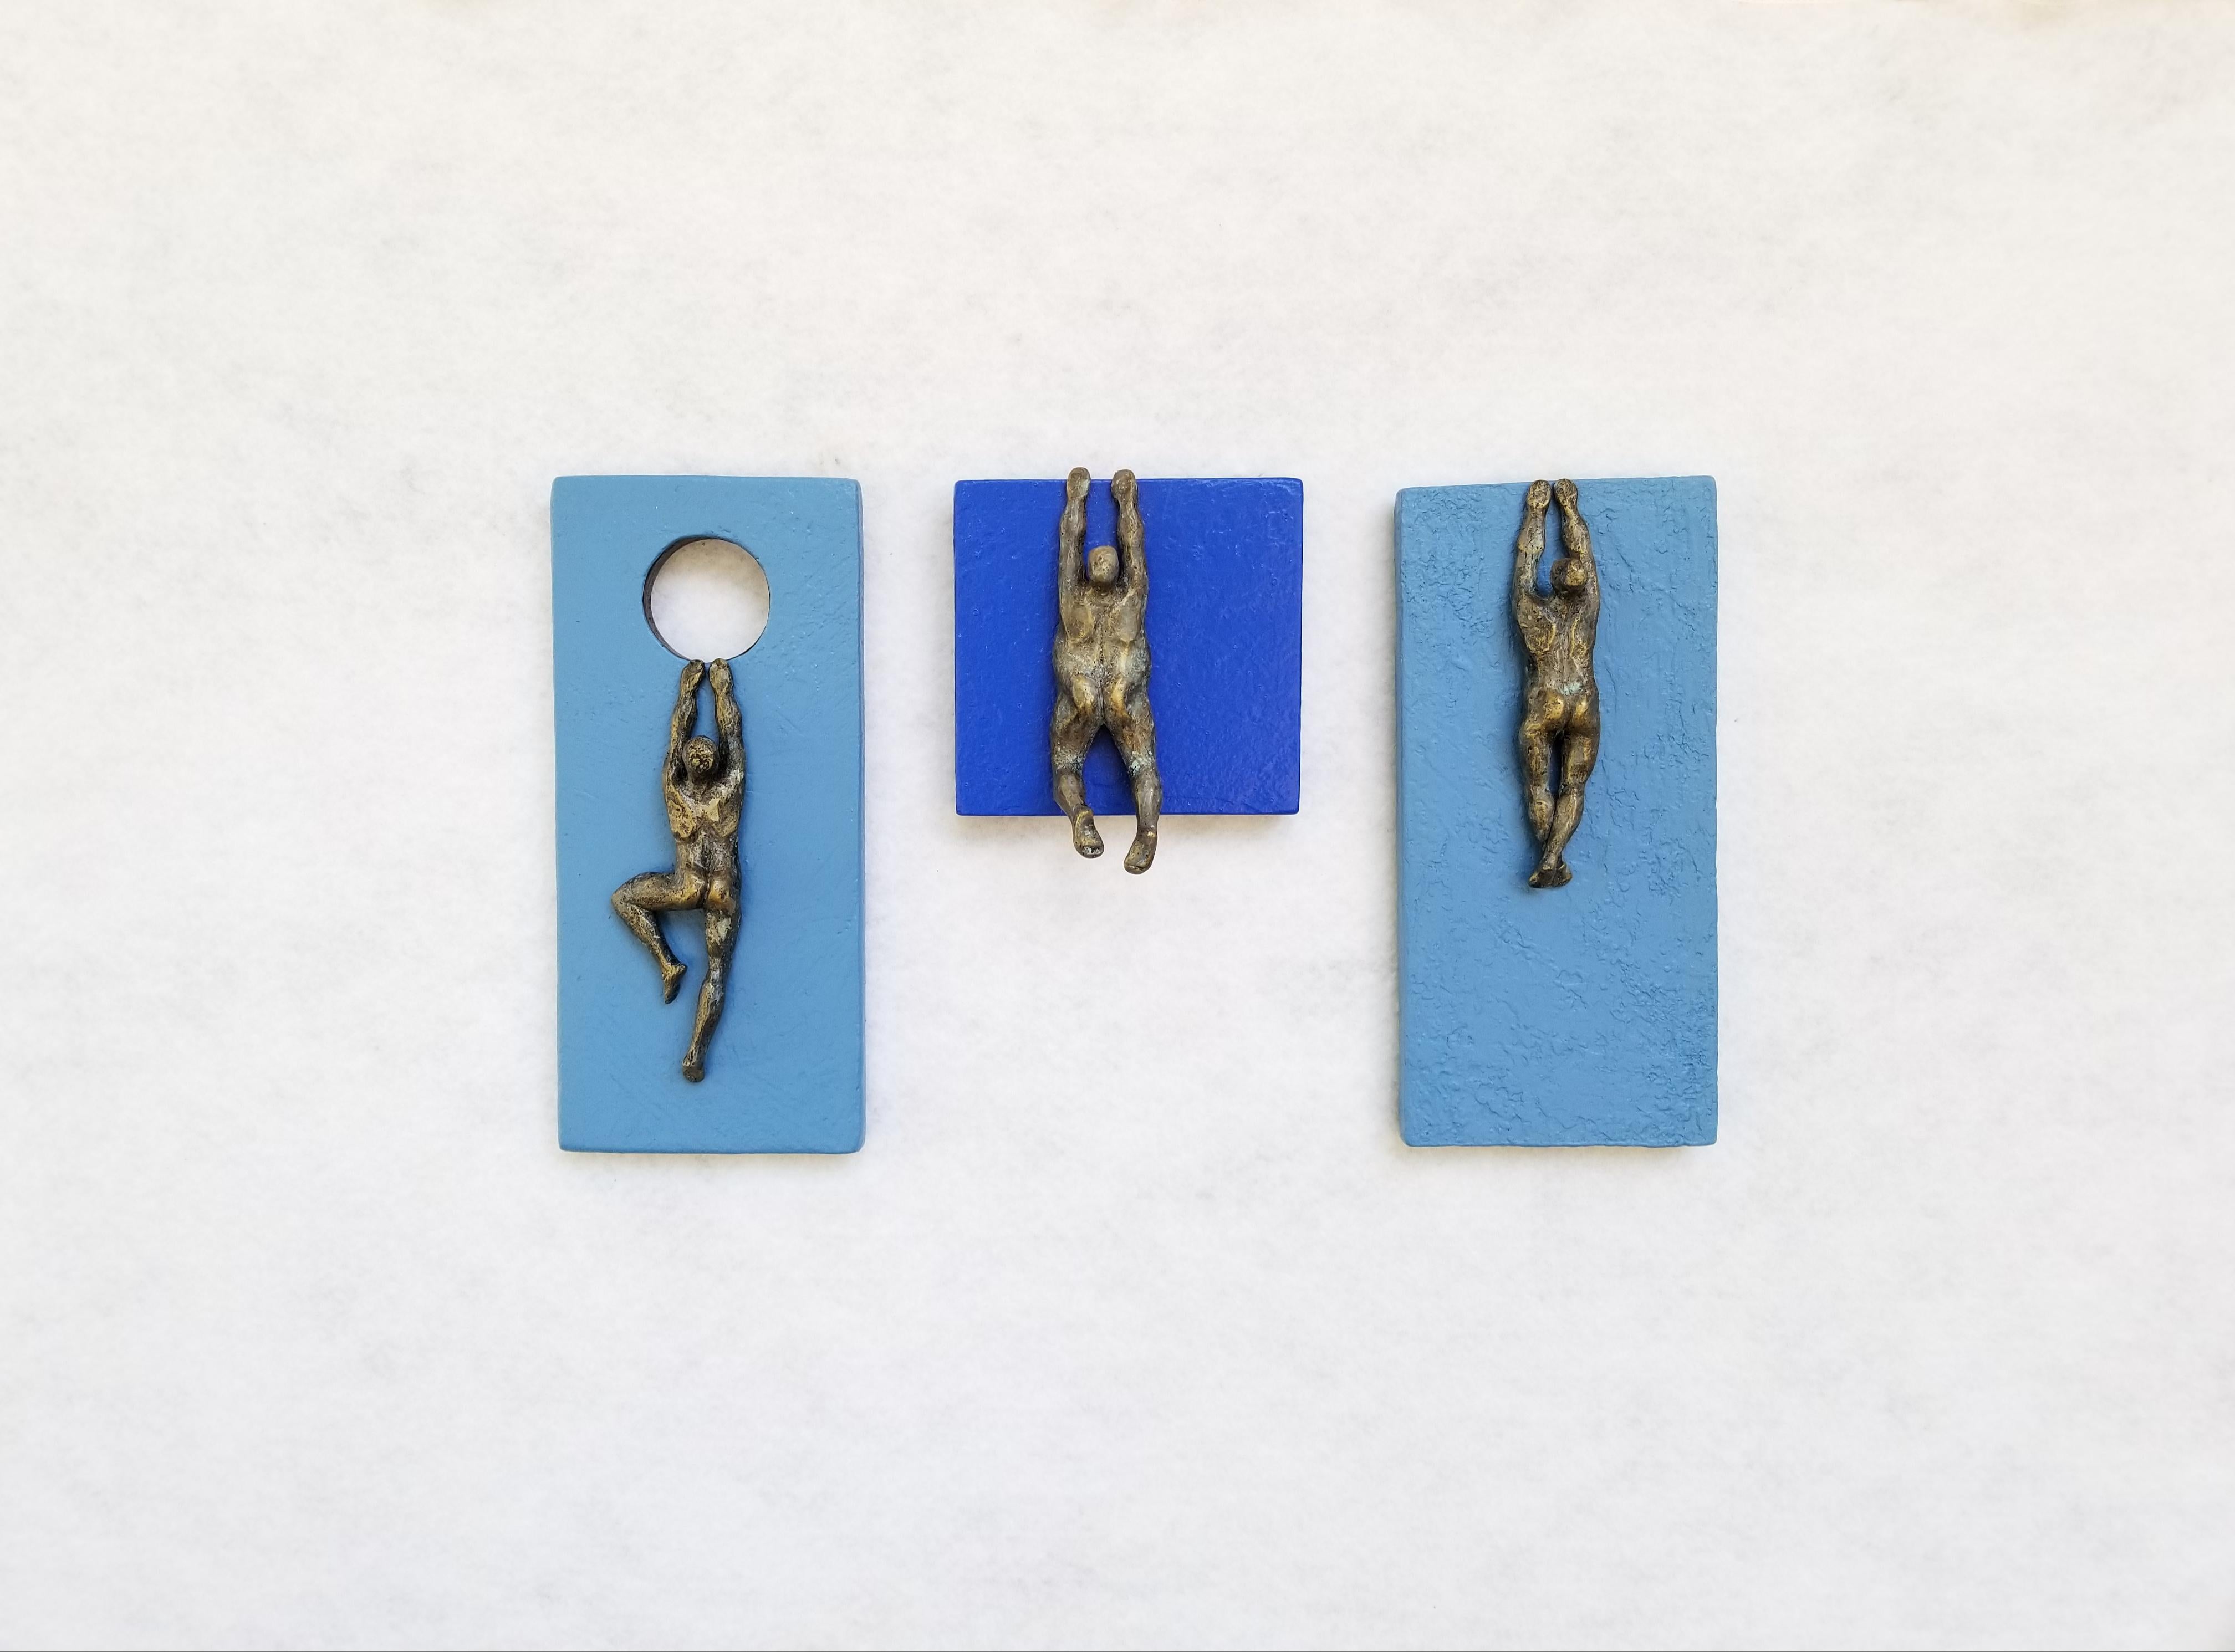 <p>Artist Comments<br>Artist Yelitza Diaz displays a modern sculpture of three bronze figures climbing geometric designs. The first figure clings to a circular cavity carved from a pale blue rectangular panel. The remaining two figures hang by the